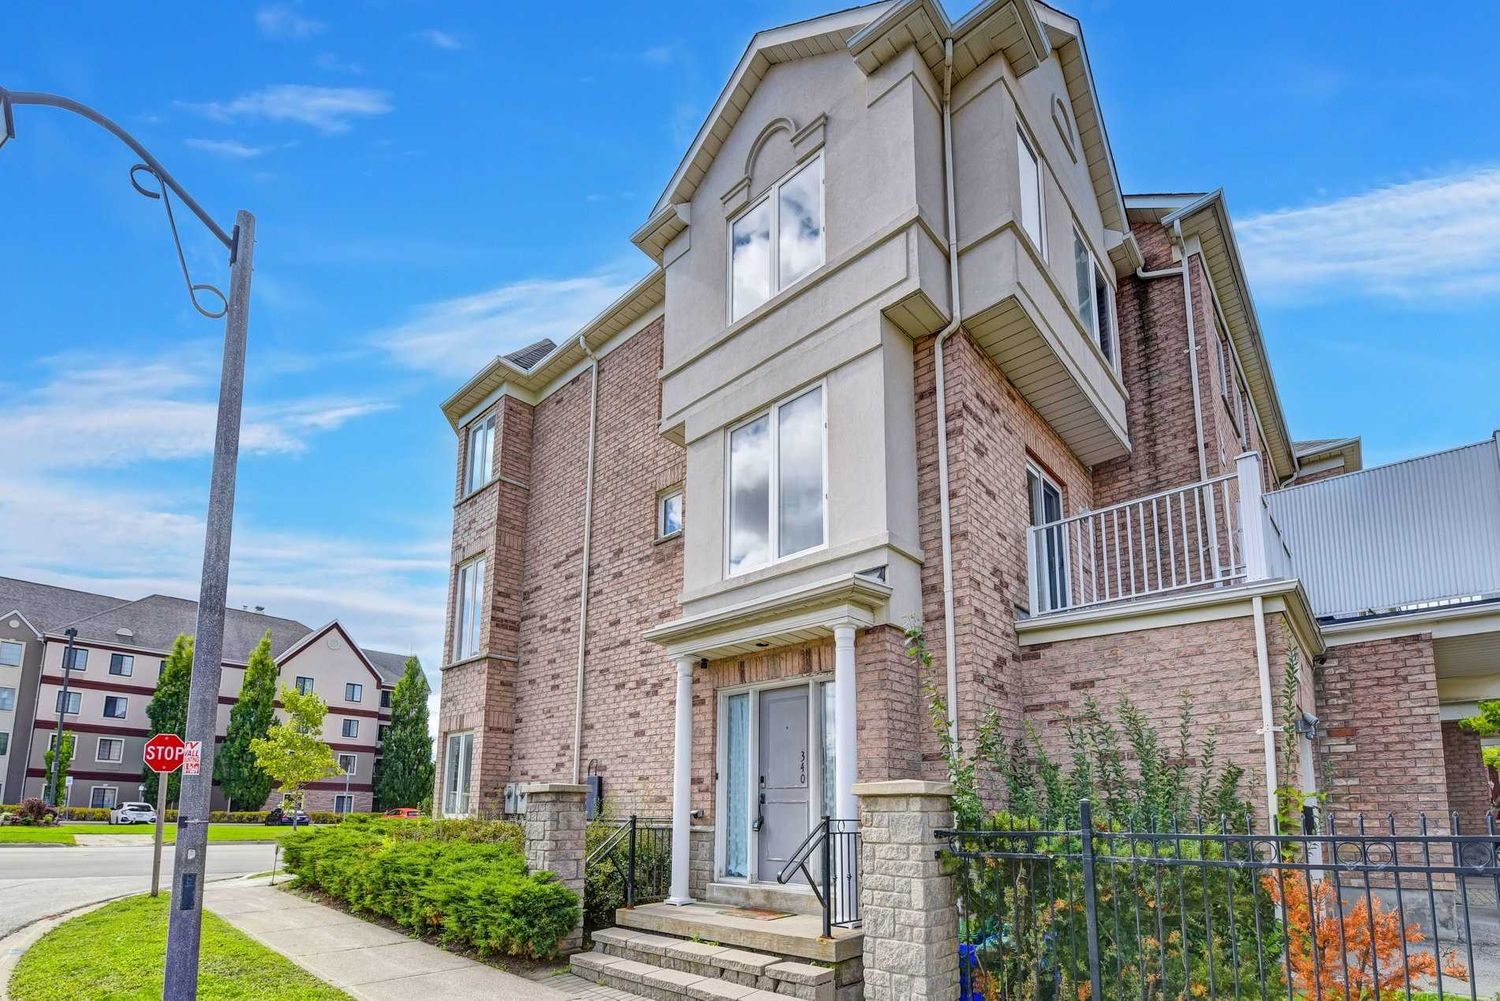 300-376 South Park Road. South Park & Leitchcroft Townhomes is located in  Markham, Toronto - image #2 of 3